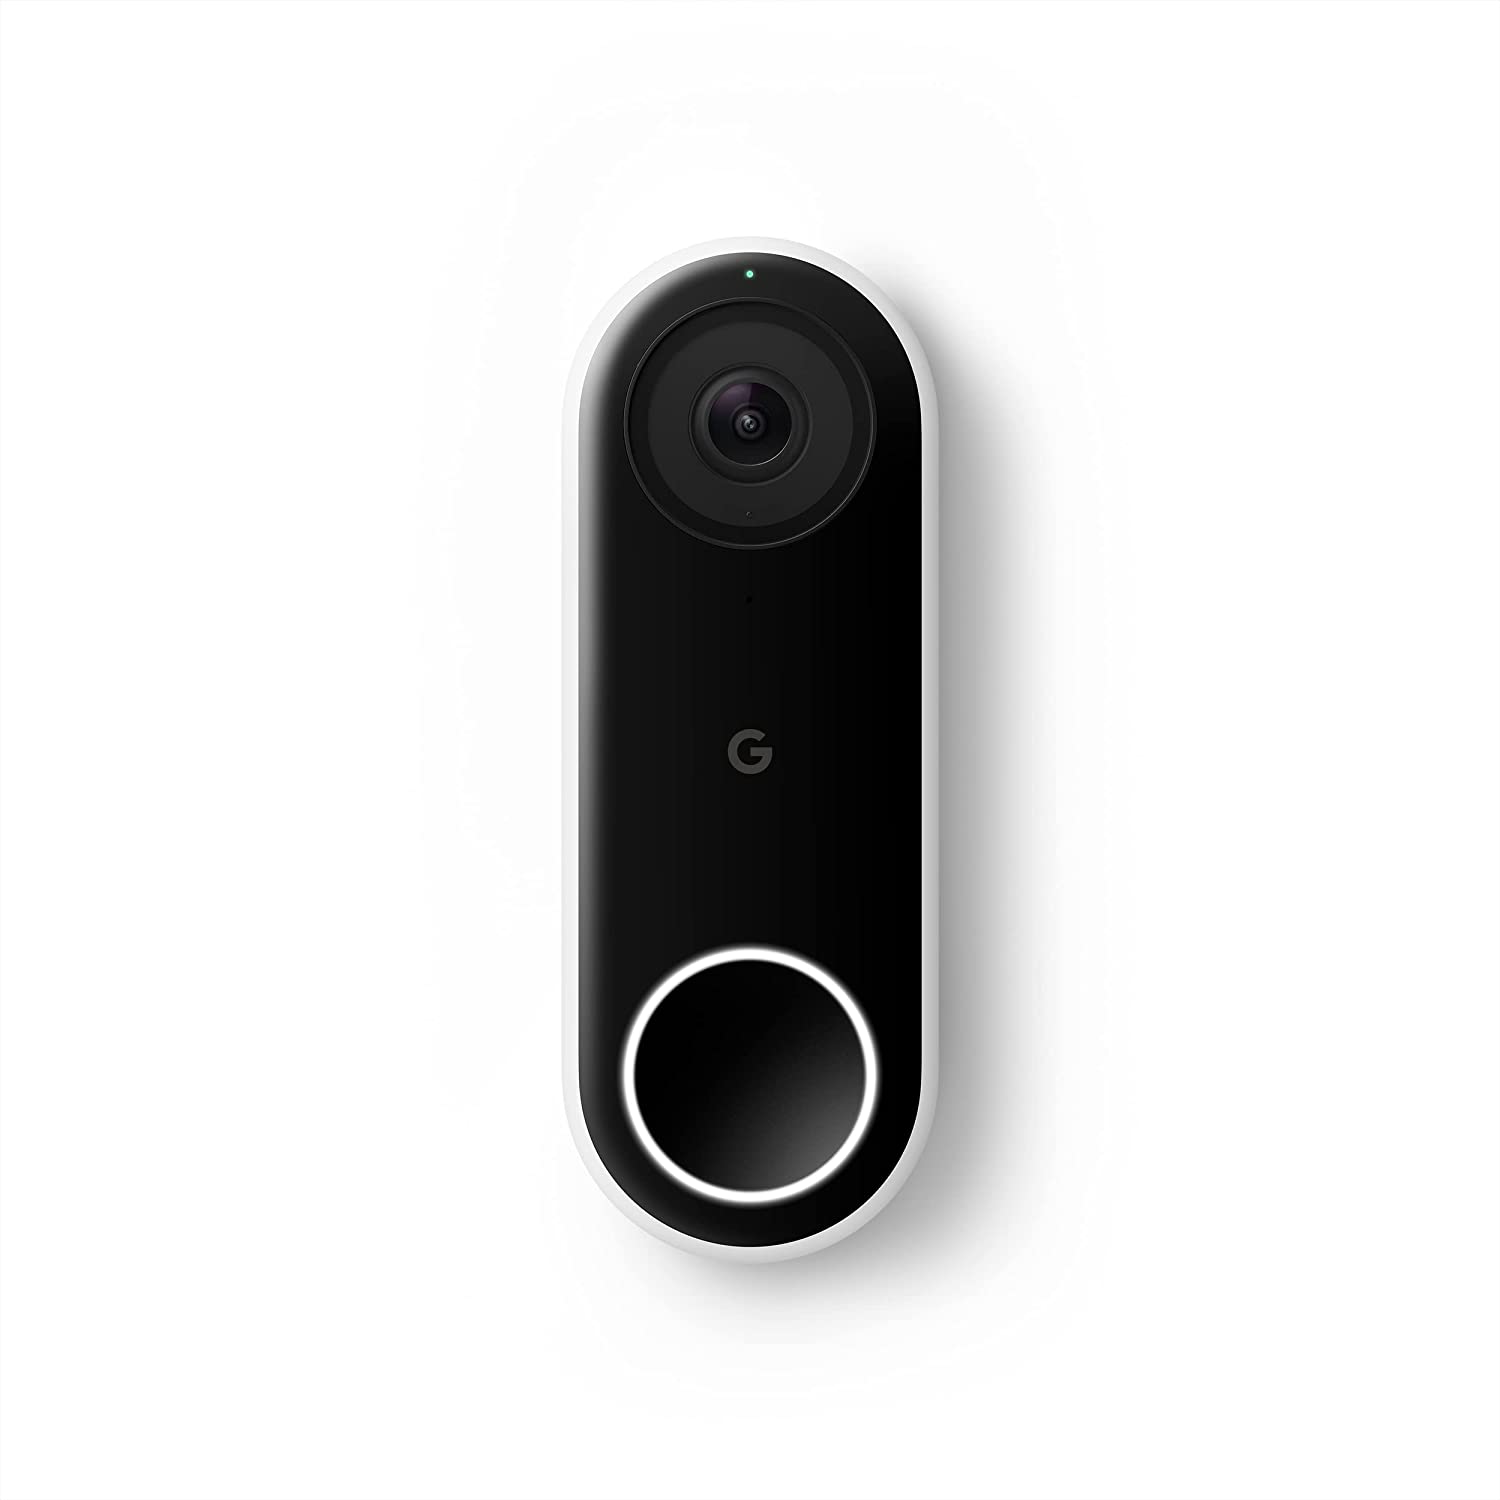 Google Nest Wired Doorbell $79 + Free Shipping @ B&H